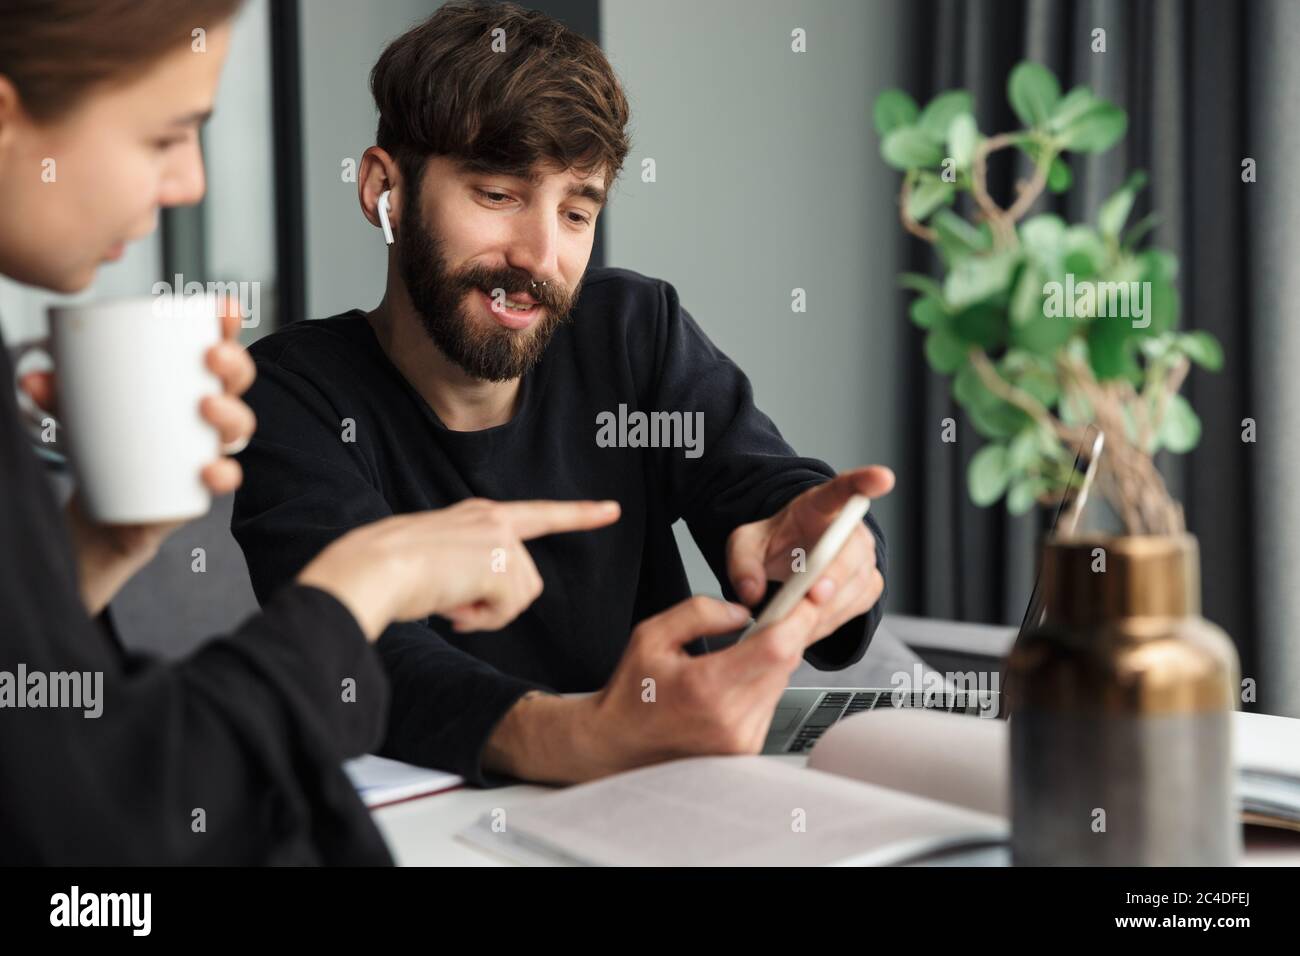 Image of young joyful colleagues discussing project and using cellphone while working at table in cozy room Stock Photo